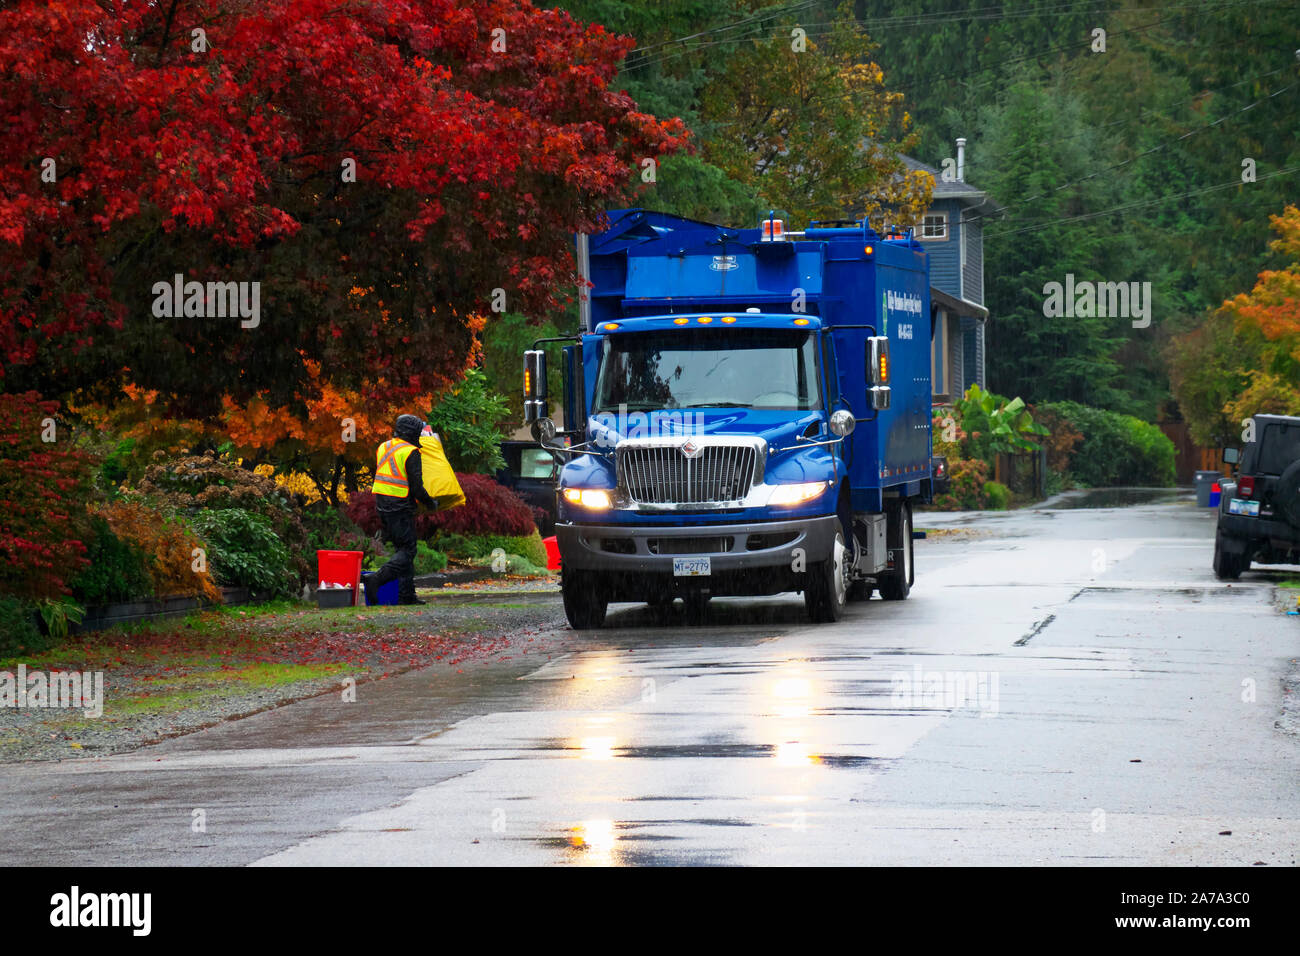 Blue Recycling Truck at Curbside. Maple Ridge, B. C., Canada. Stock Photo